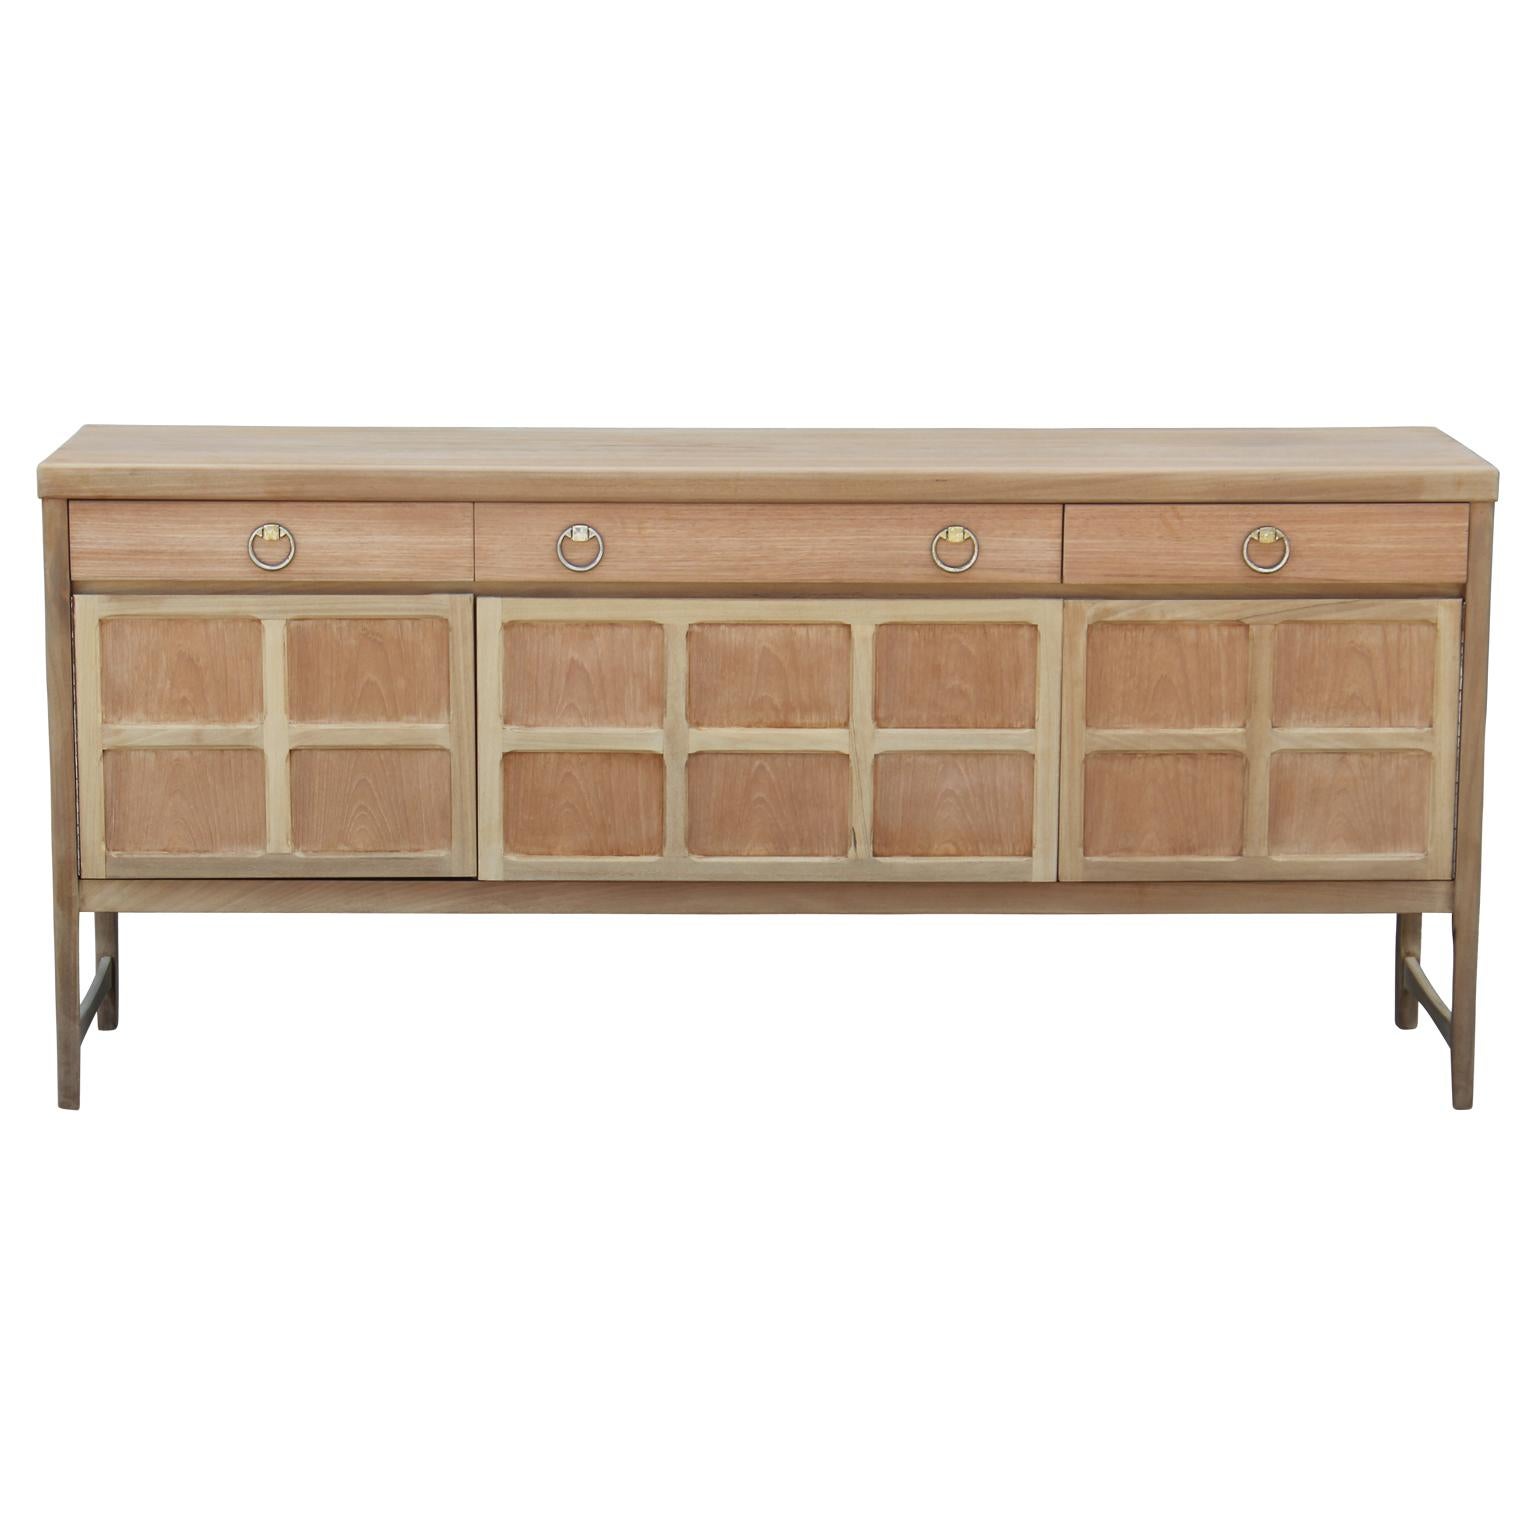 Freshly bleached sophisticated sideboard with brass ring handles. Centre cabinet drops down. Three drawers provide additional storage.